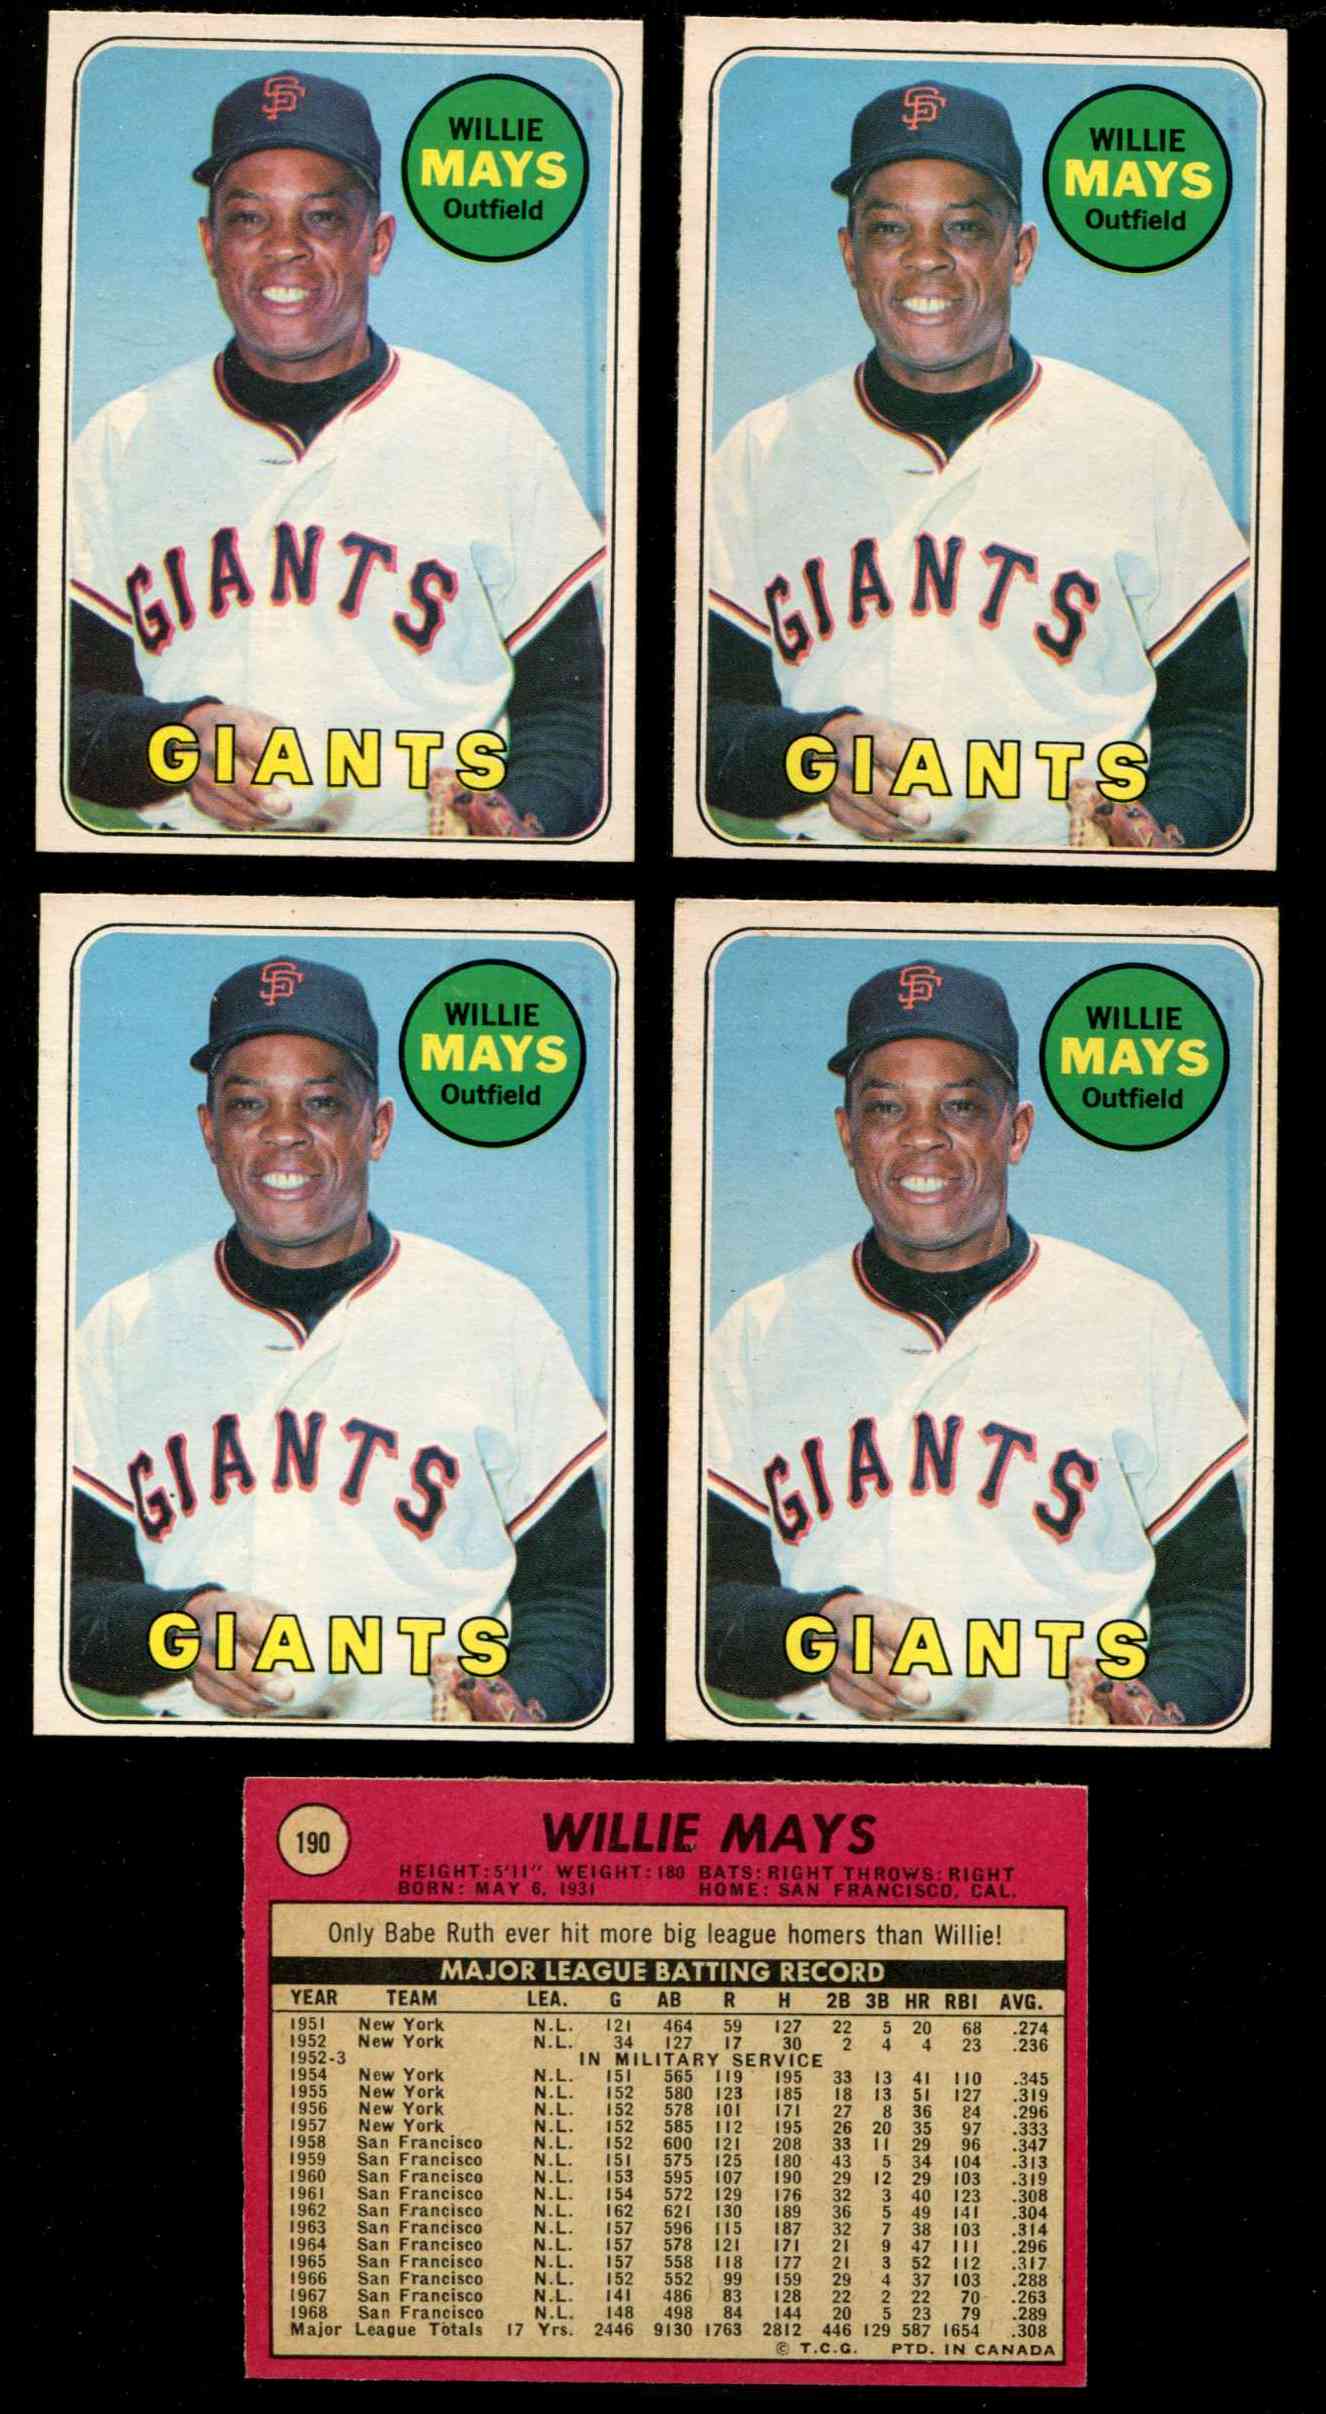 1969 O-Pee-Chee/OPC #190 Willie Mays [#] (Giants) Baseball cards value